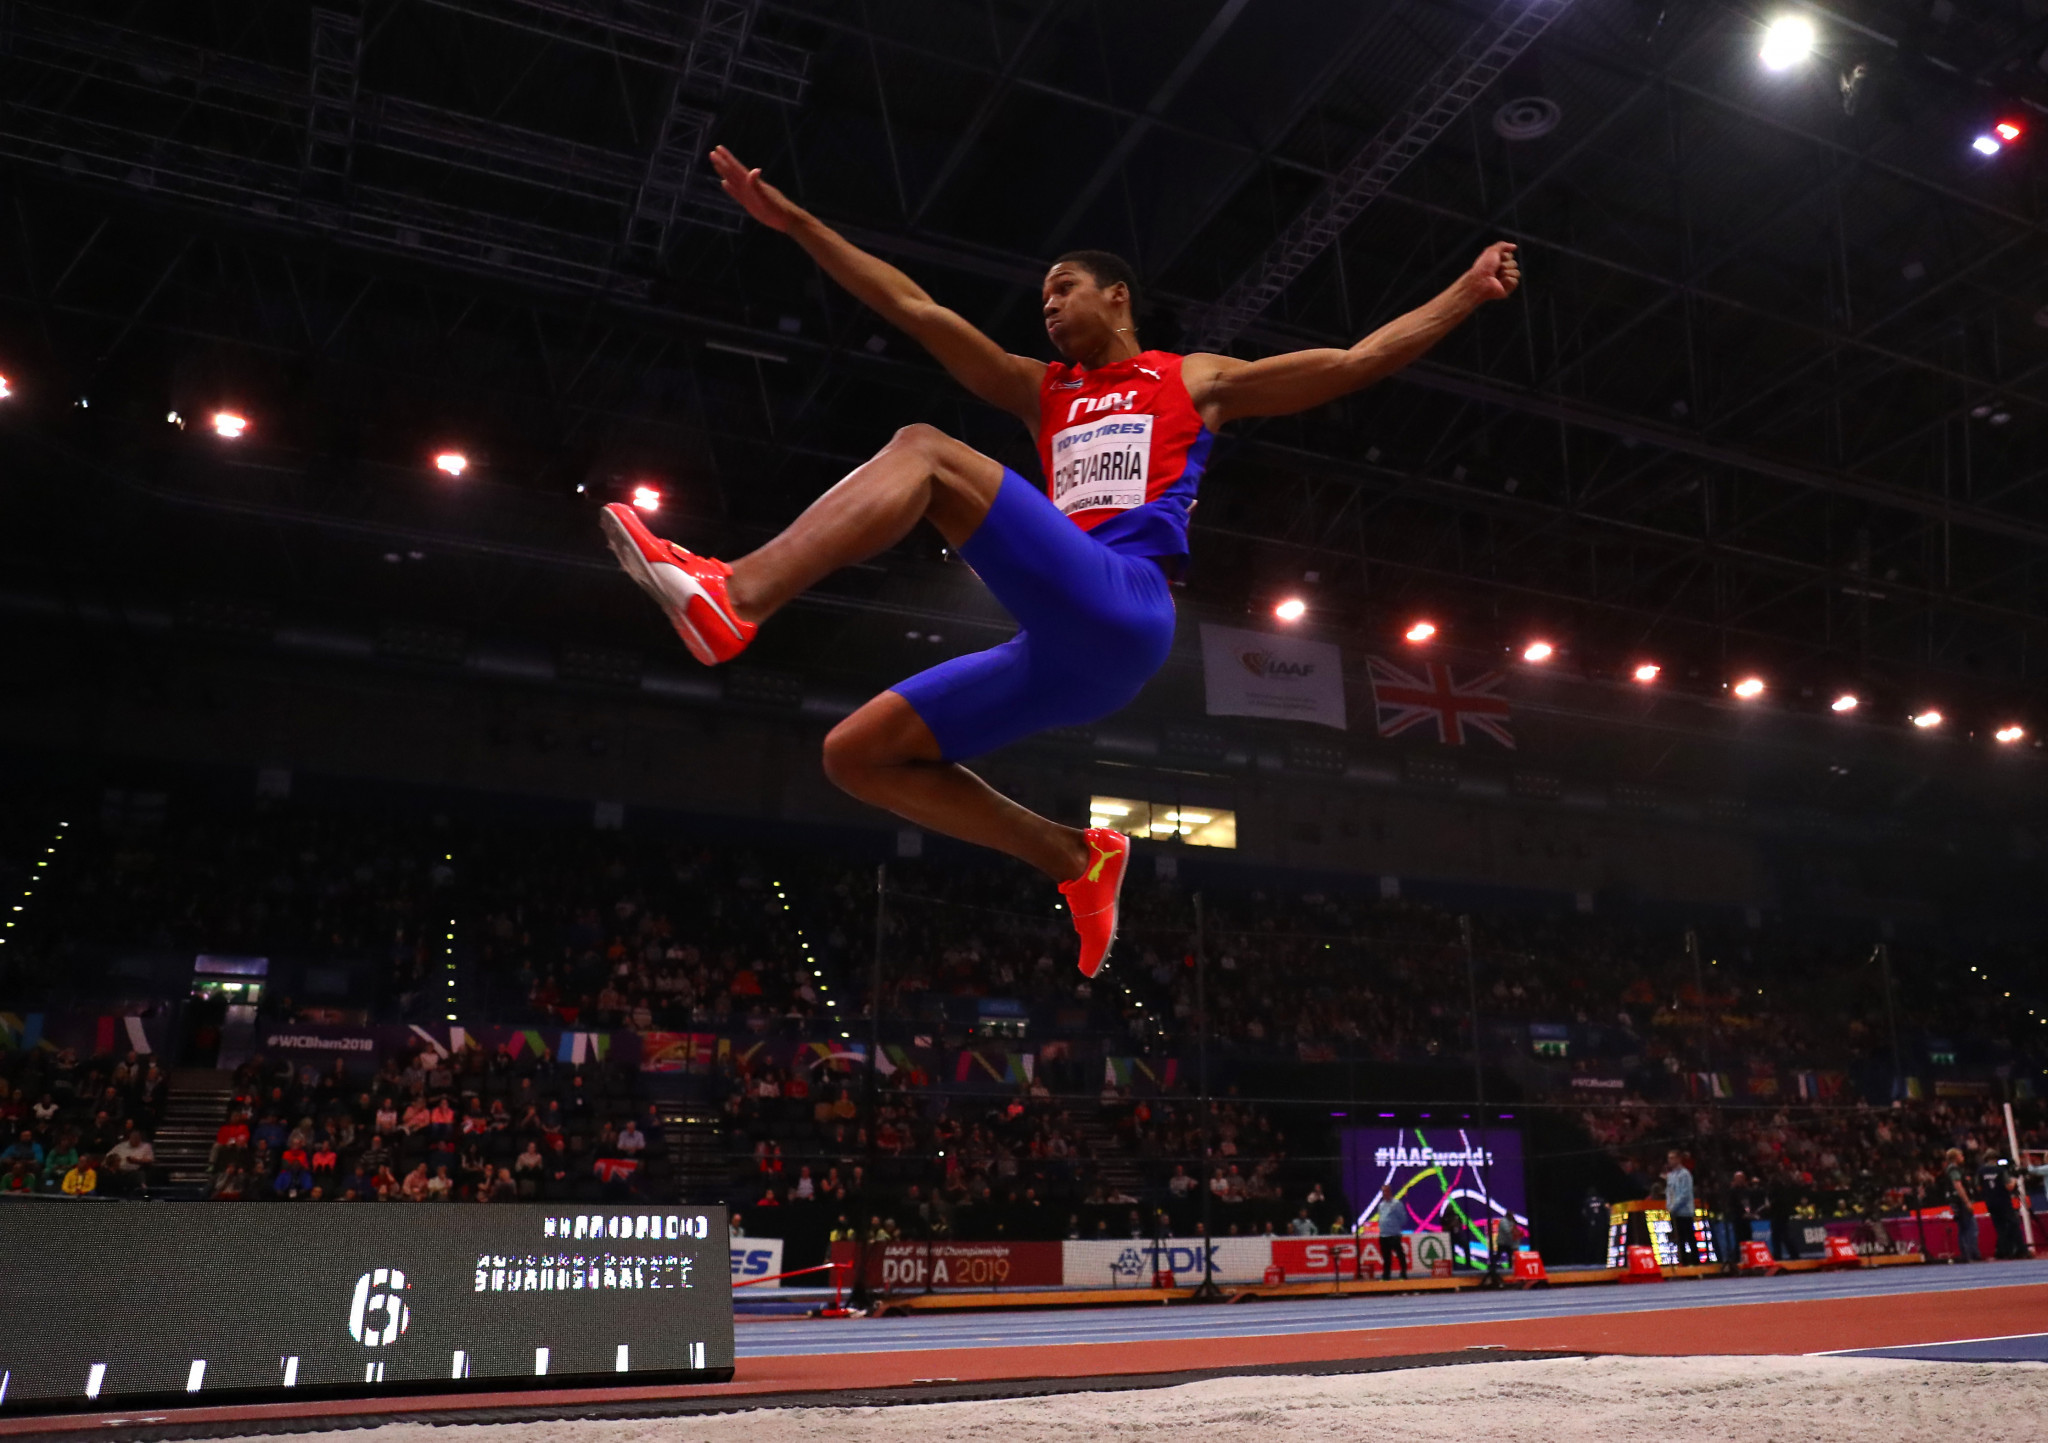 Reigning world indoor champion Juan Miguel Echevarria lost the men's long jump at the IAAF World Tour in Karlsruhe today on count back ©Getty Images